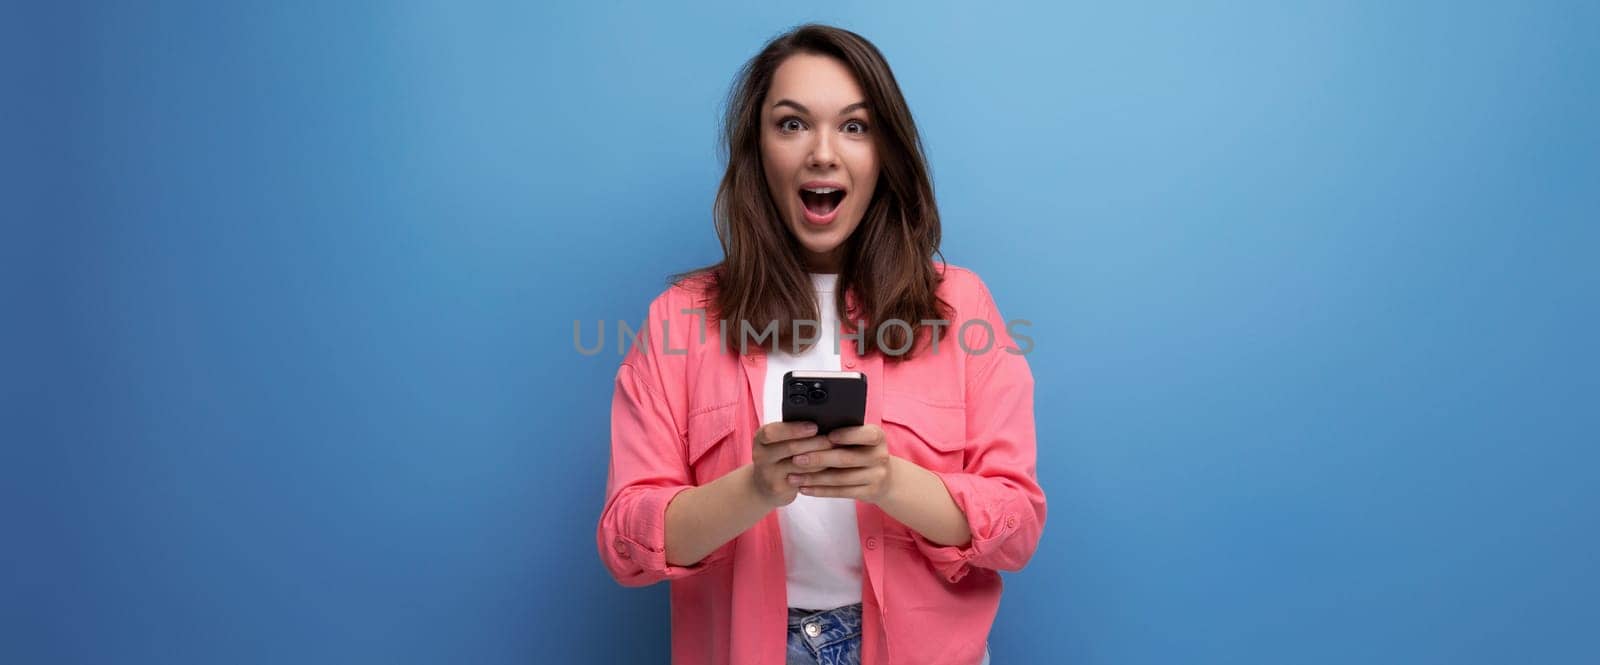 portrait of cute long haired young woman surfing online using smartphone and isolated studio background by TRMK